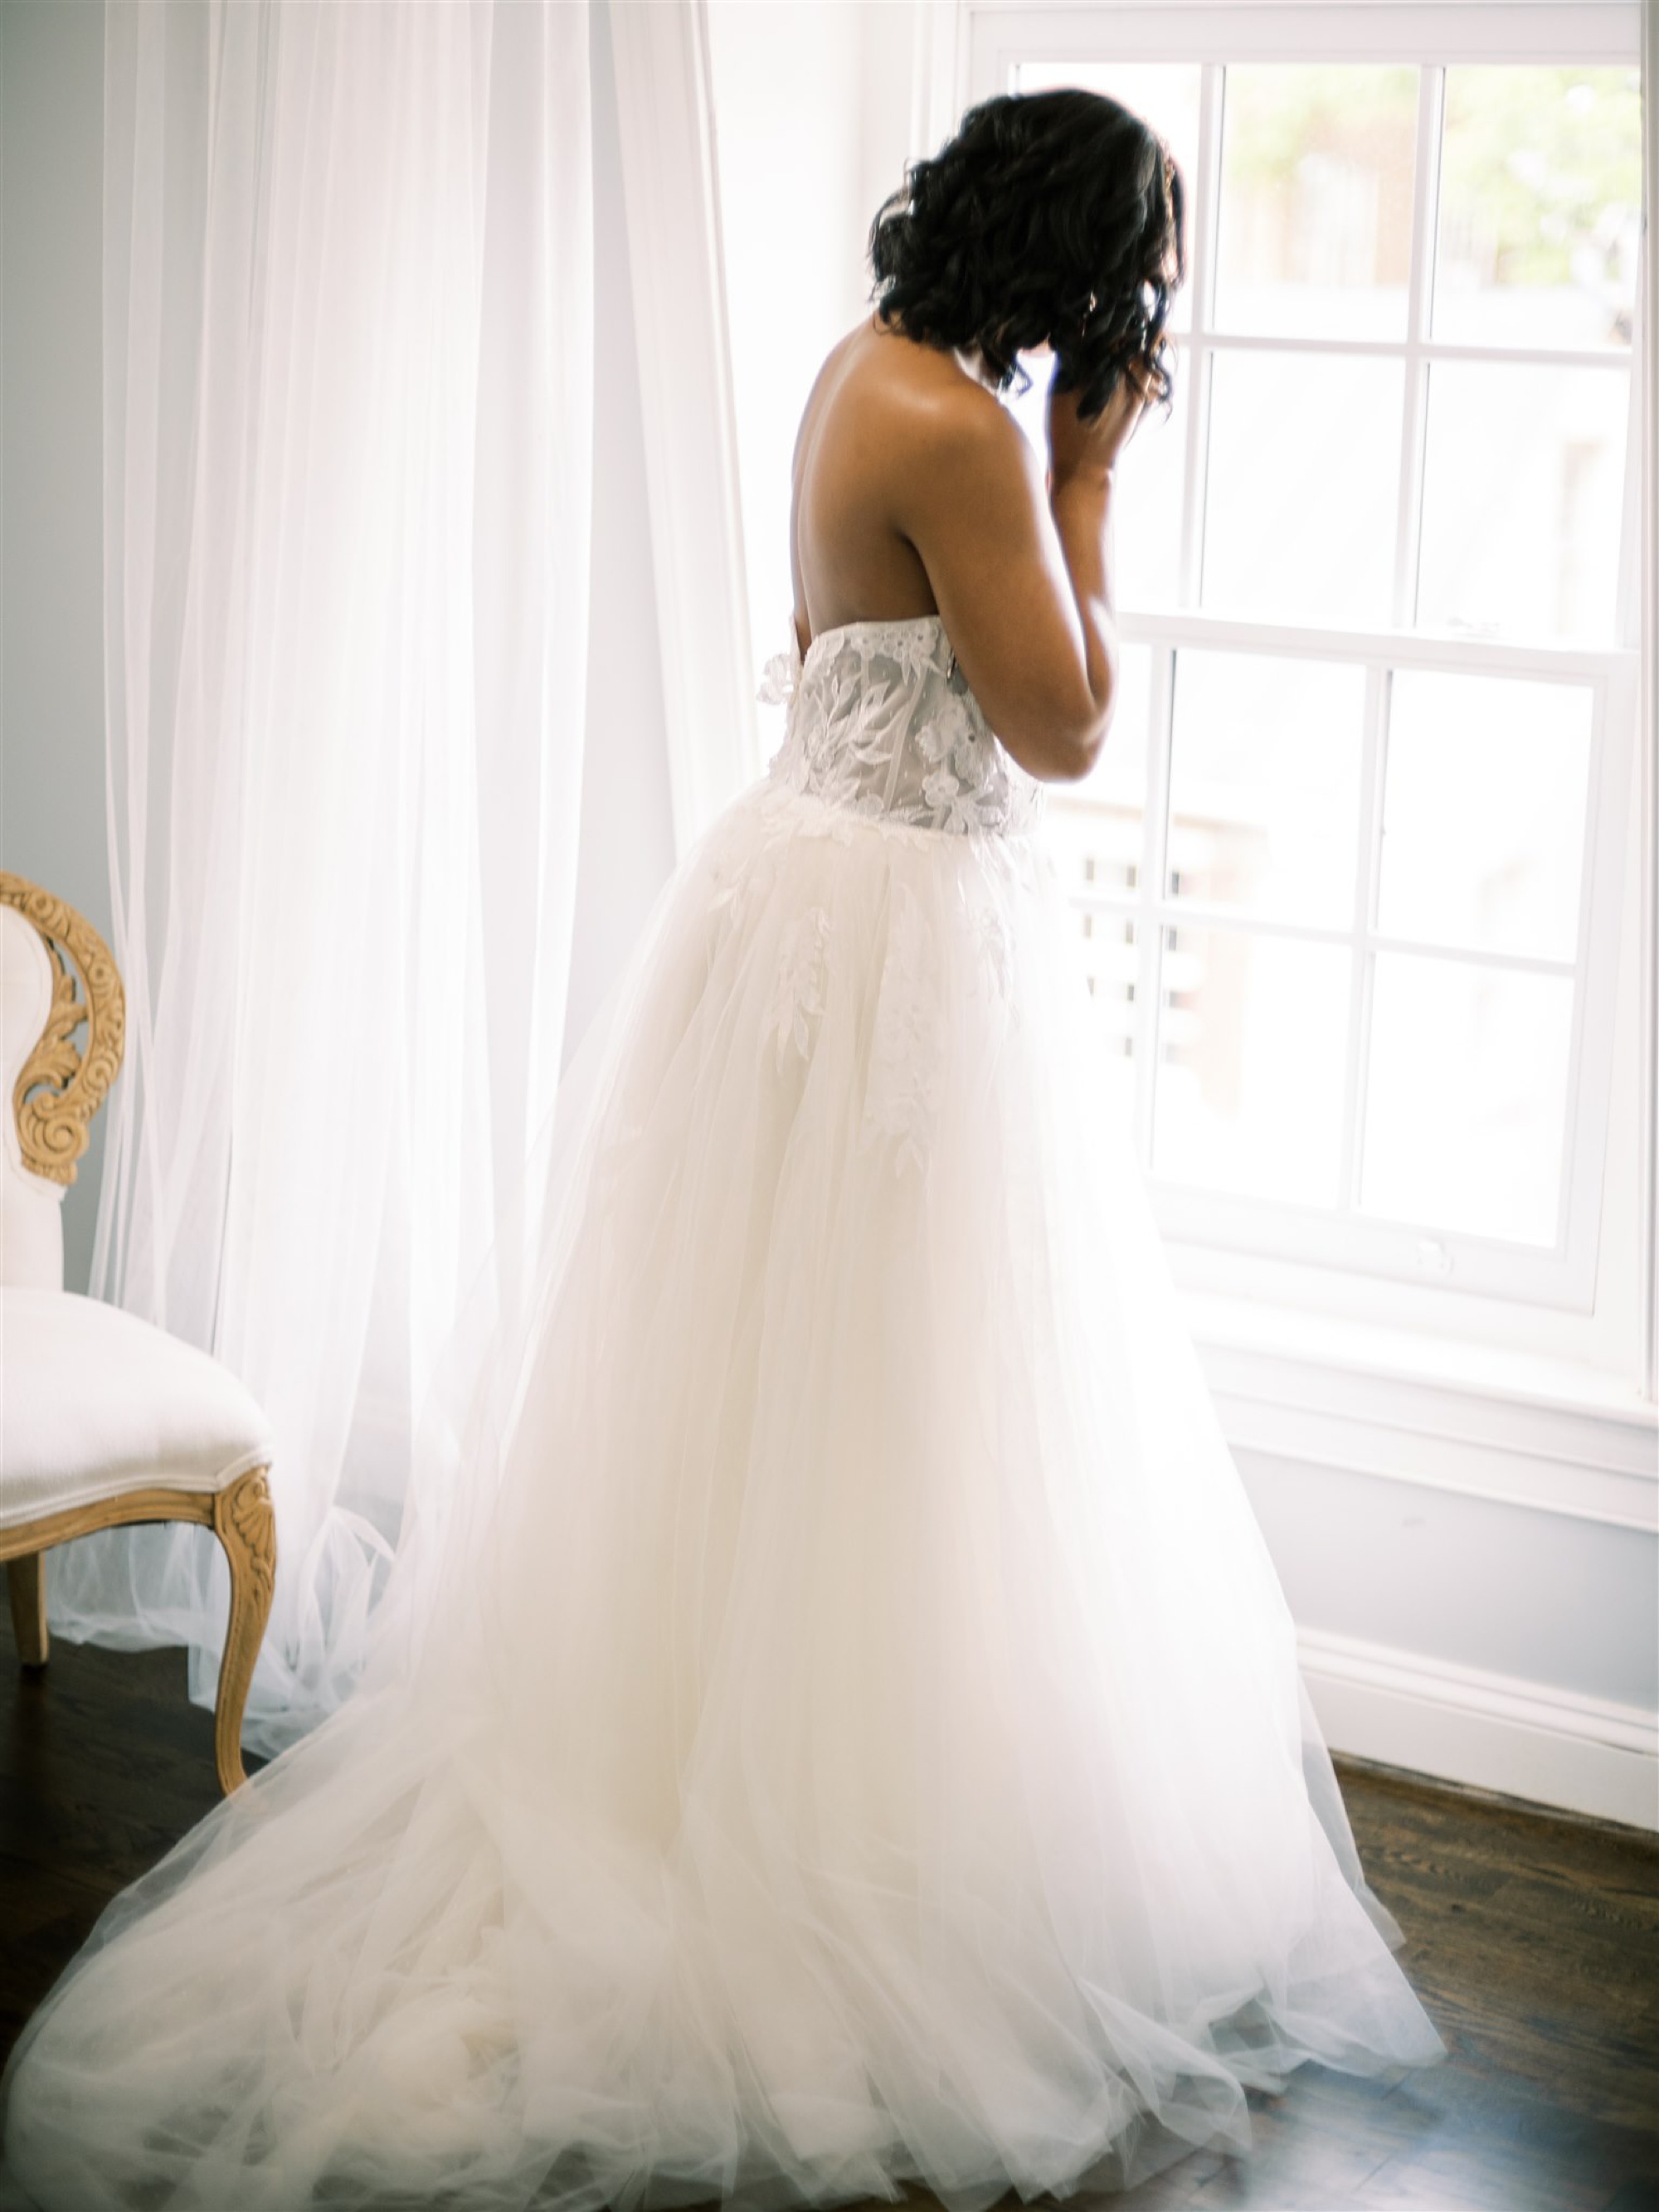 bride in gown with tulle skirt prepares for Leesburg VA microwedding